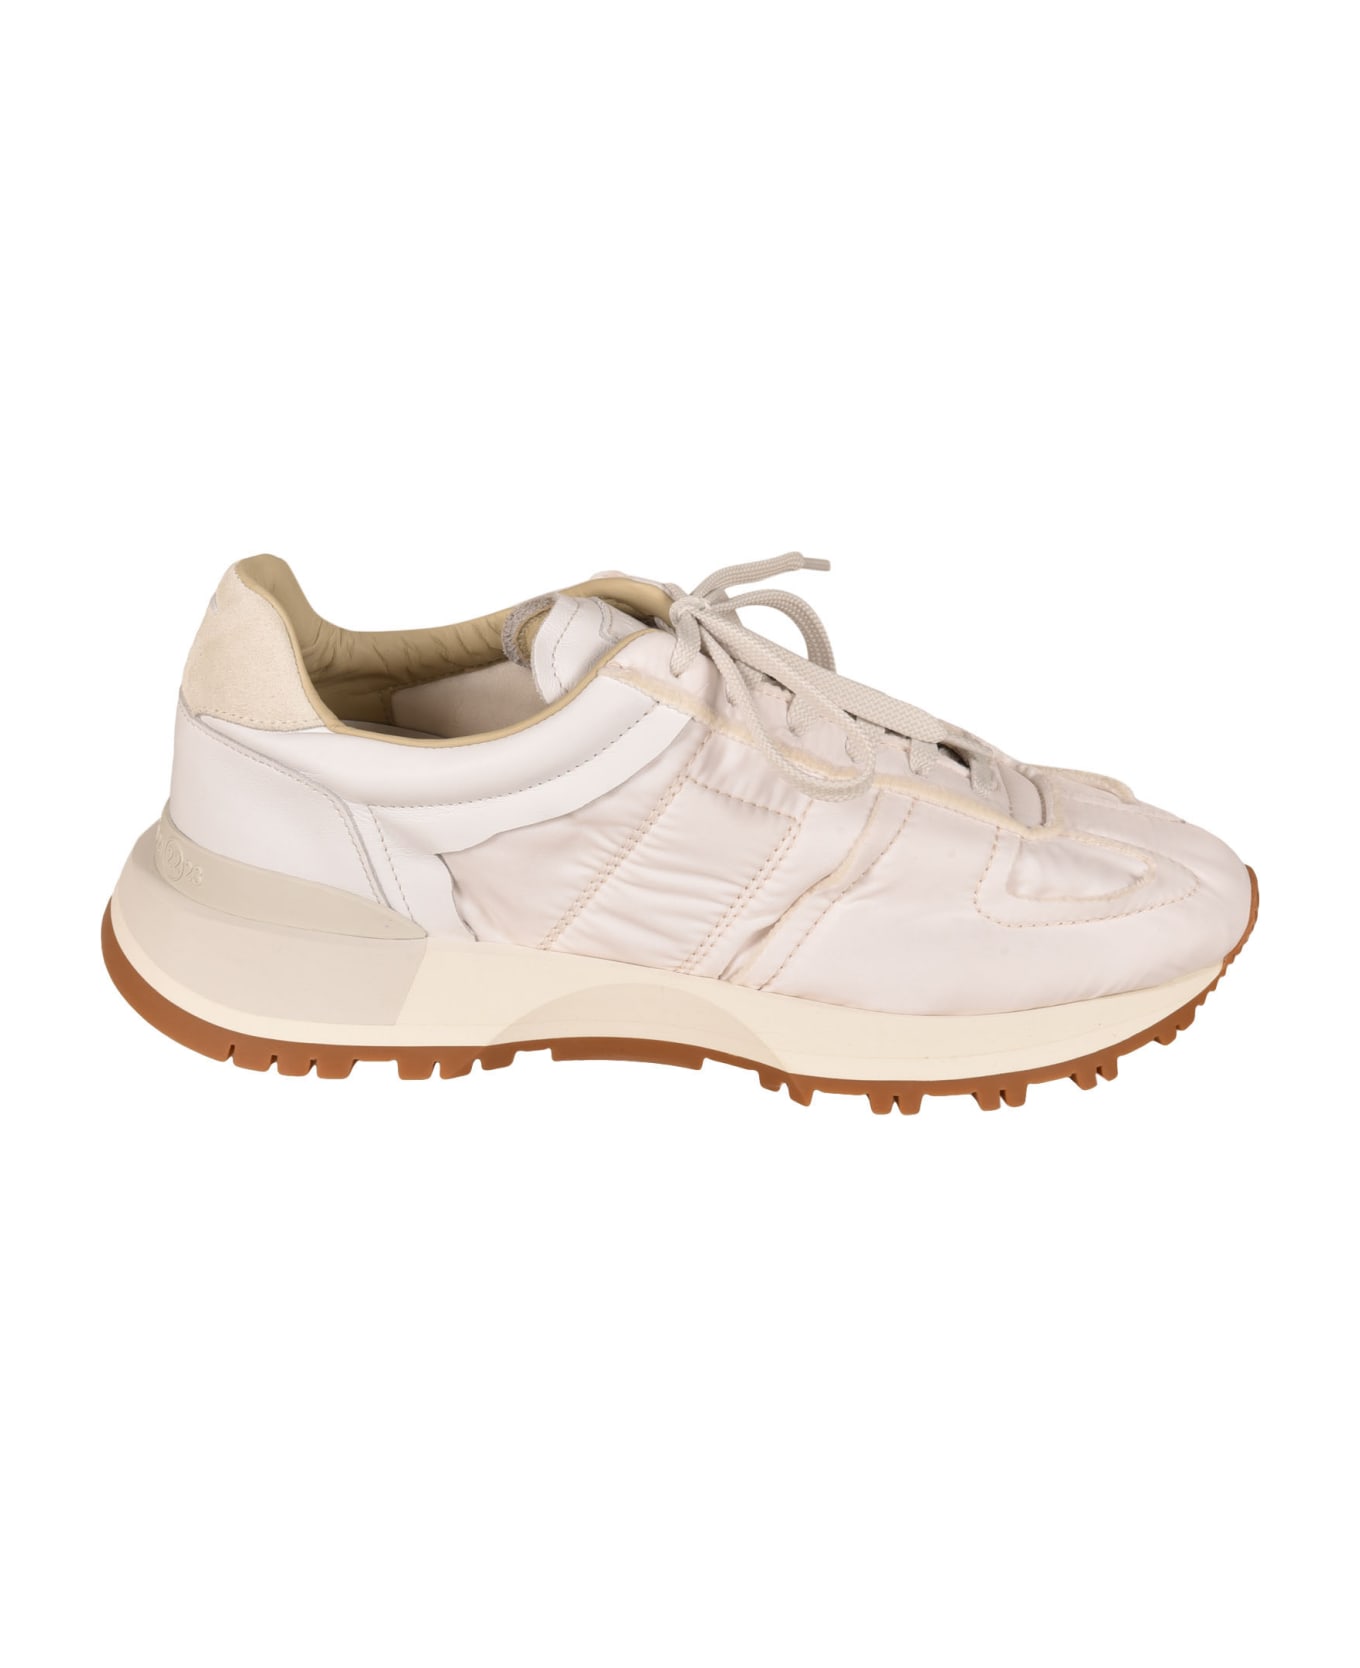 Maison Margiela Classic Low-top Lace-up Sneakers - White